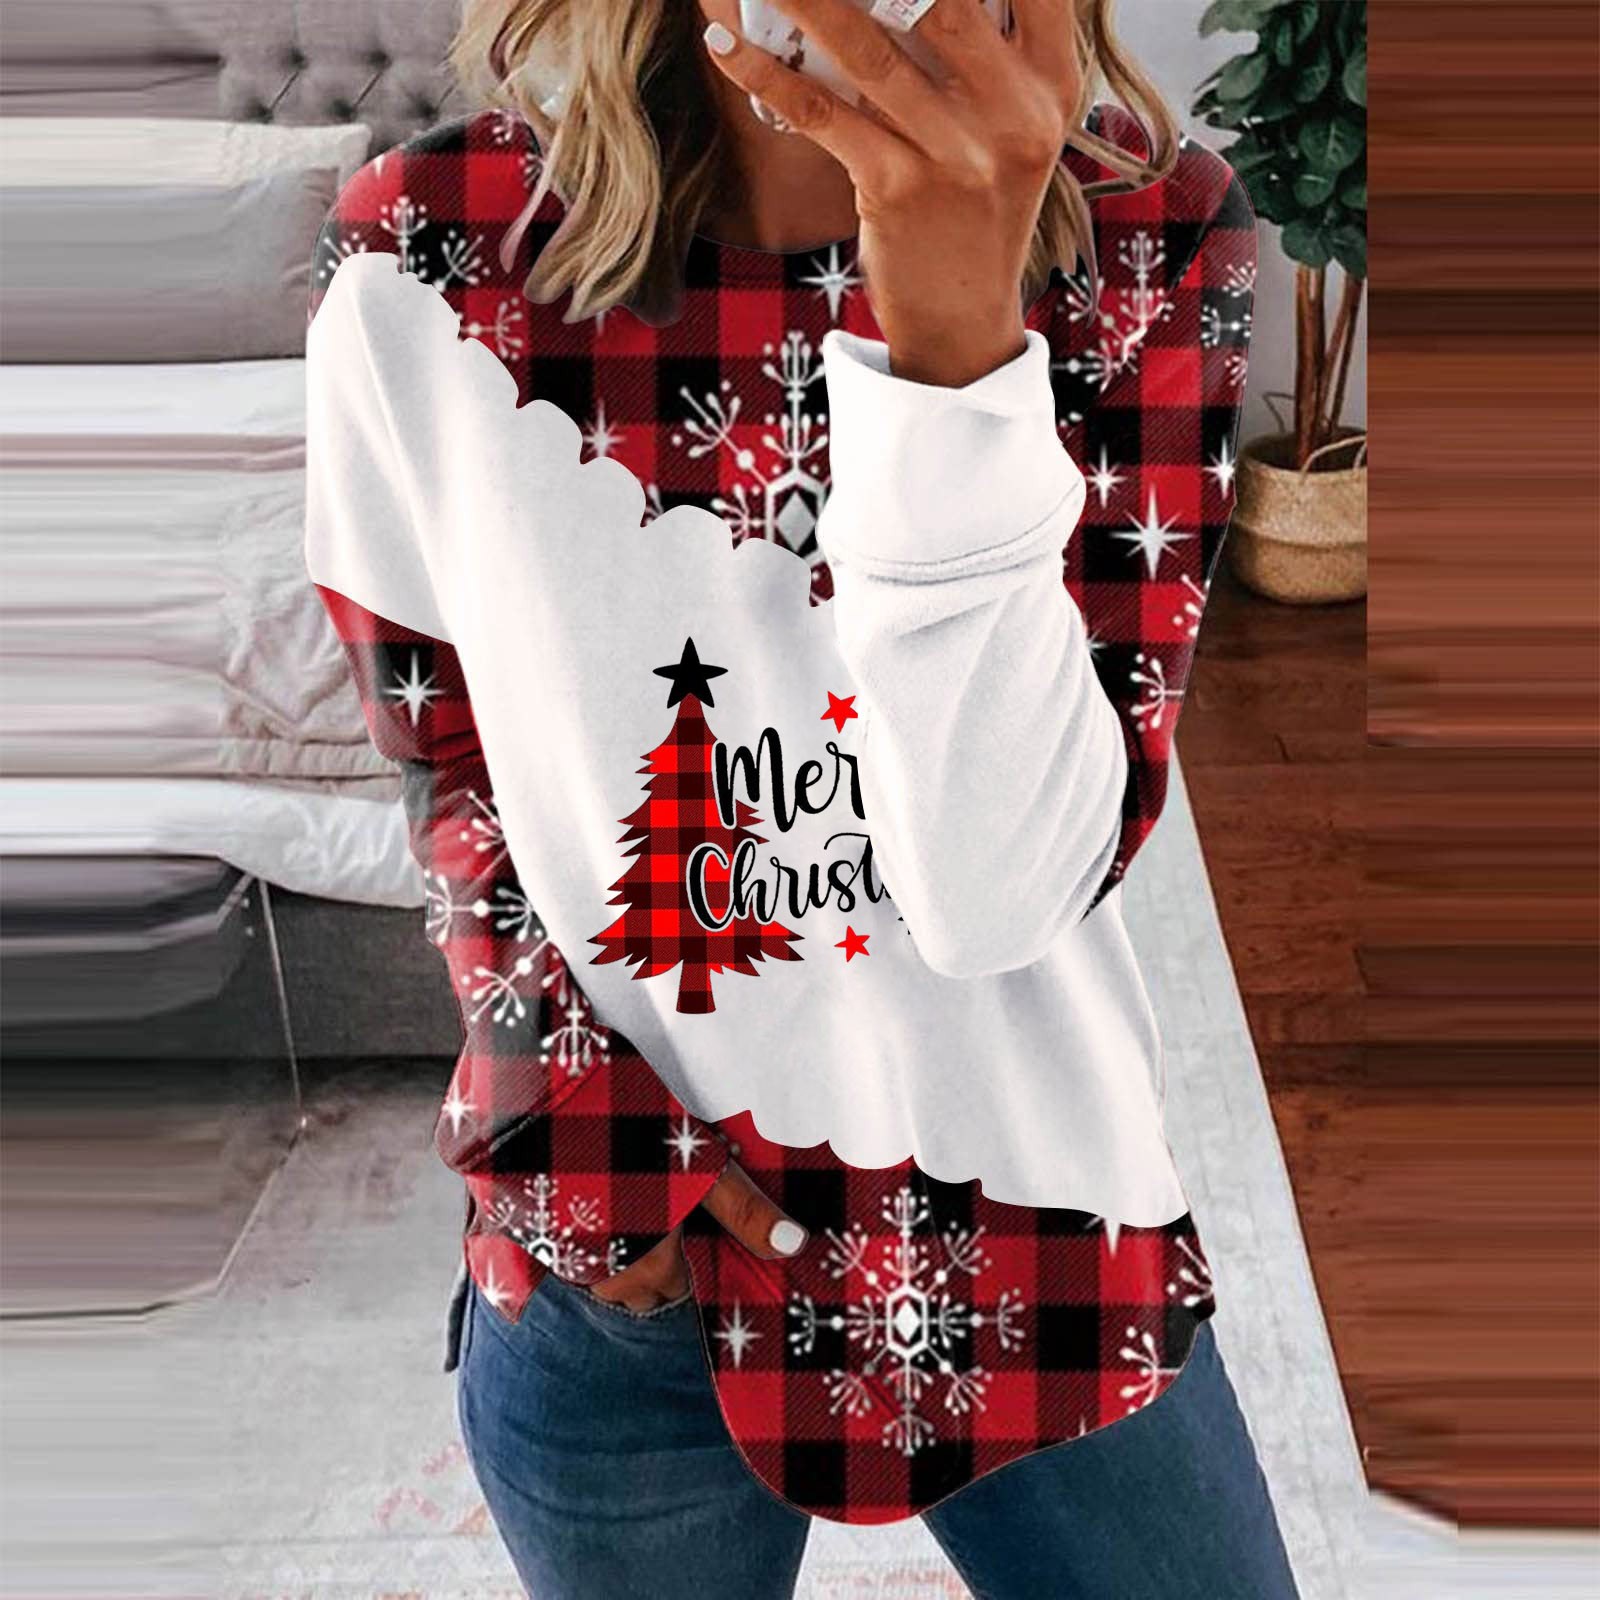 Cuoff Womens Fashion Blouses Shirts Winter Casual Christmas Positioning ...